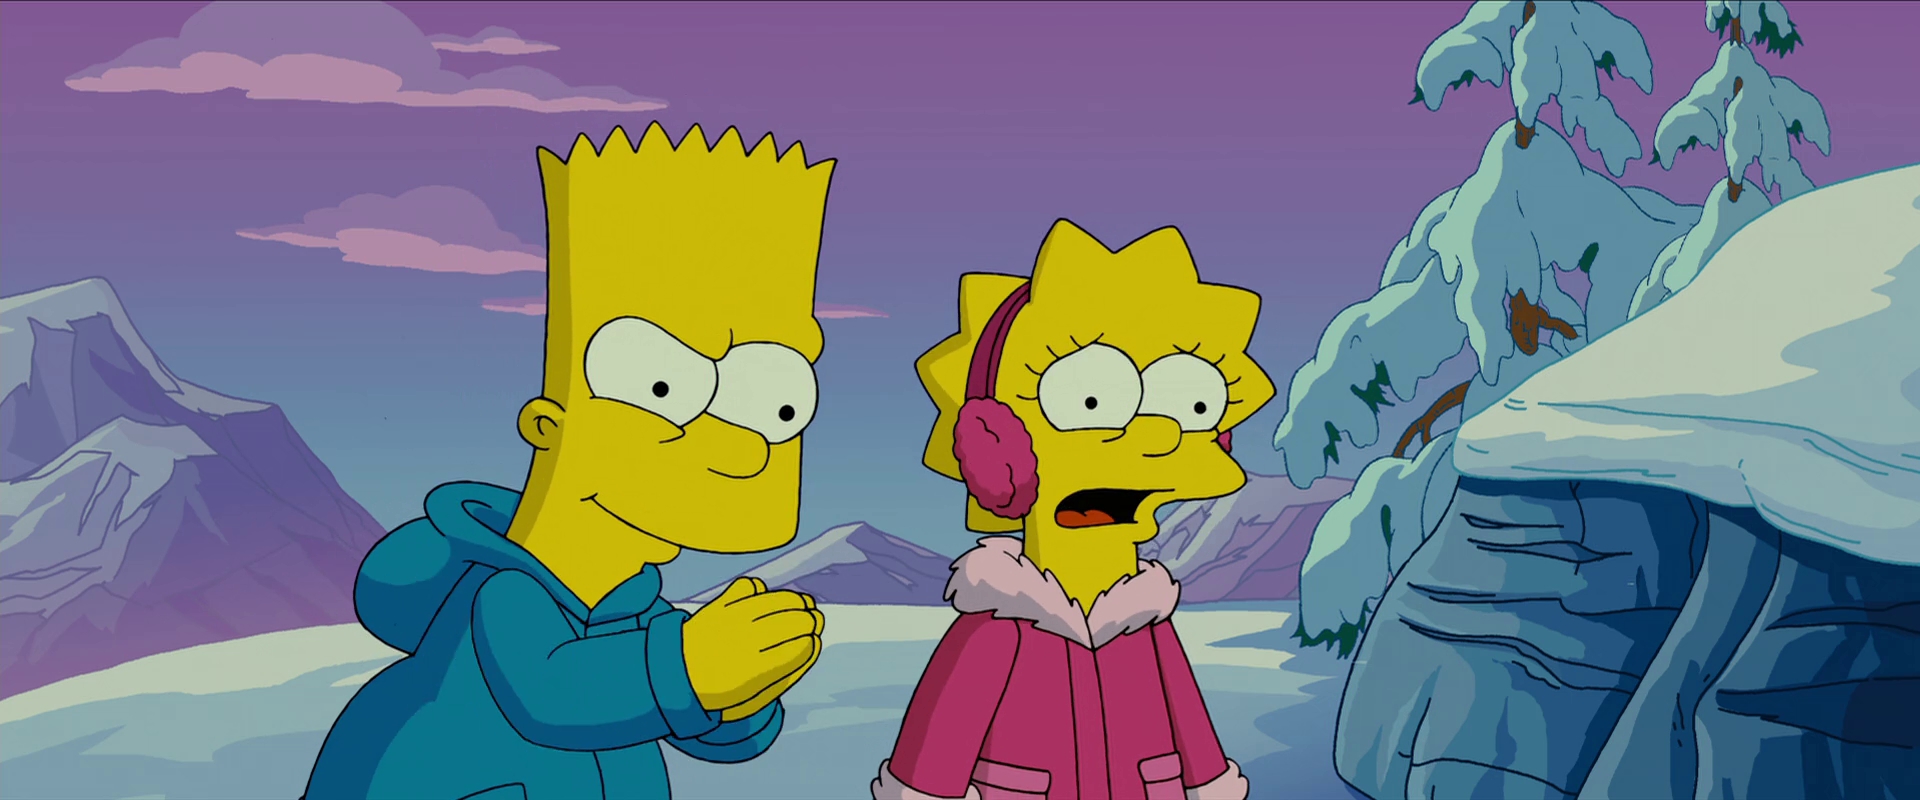 Amazing The Simpsons Movie Pictures & Backgrounds